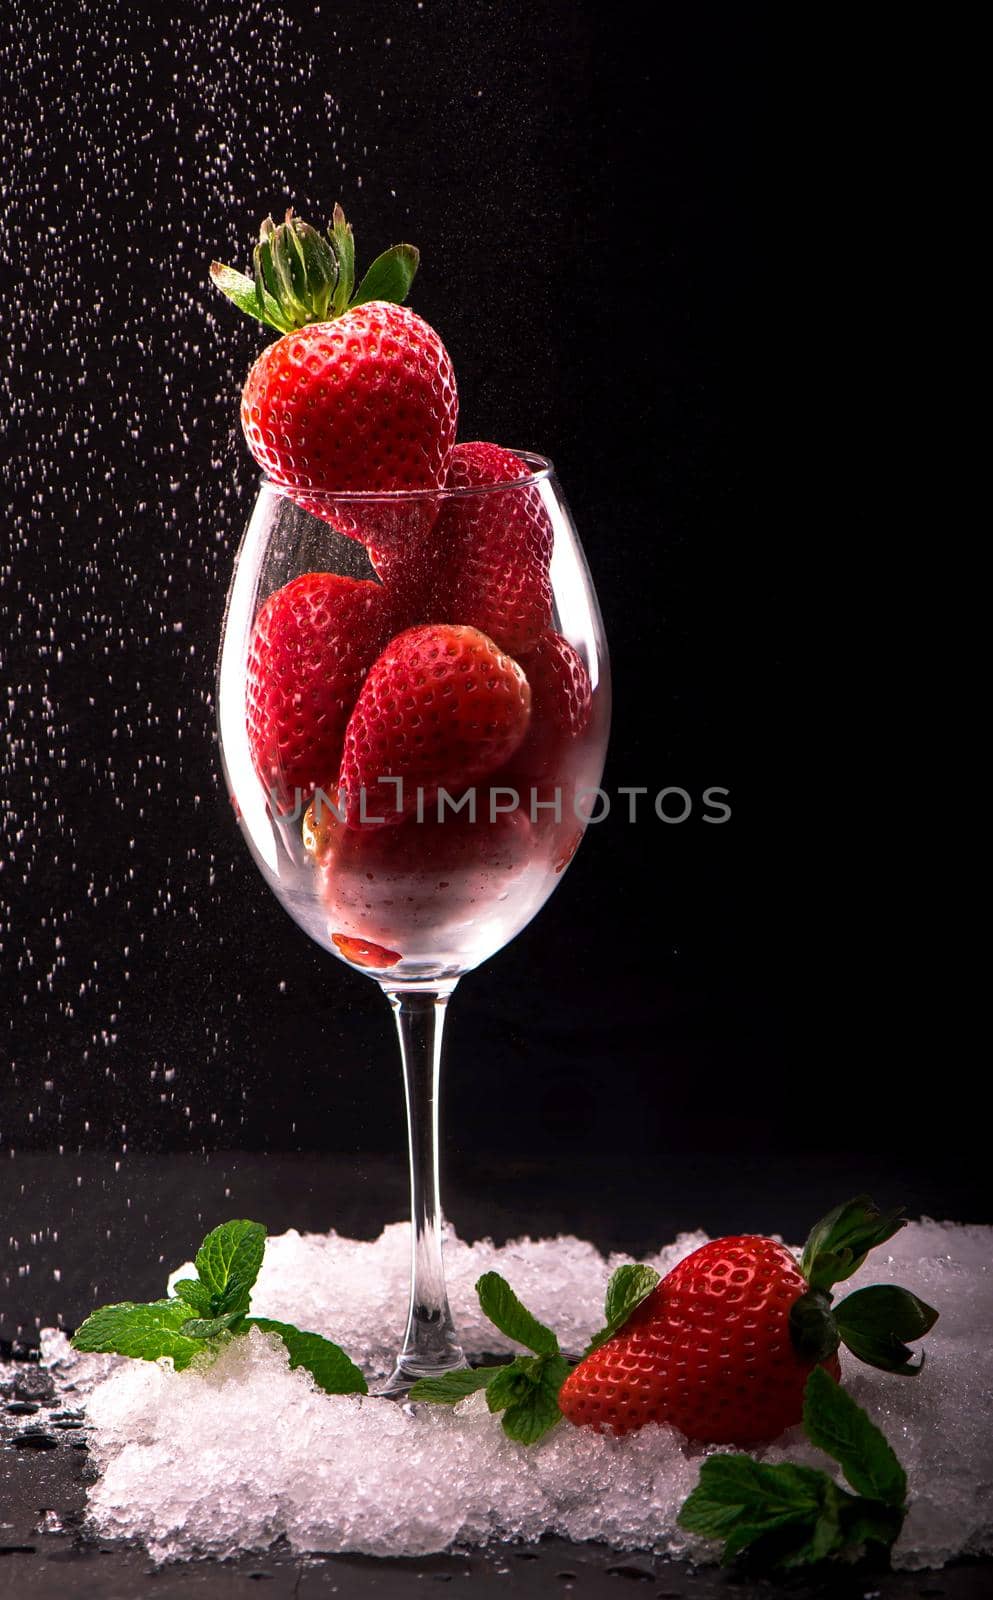 Strawberries in glass on black background